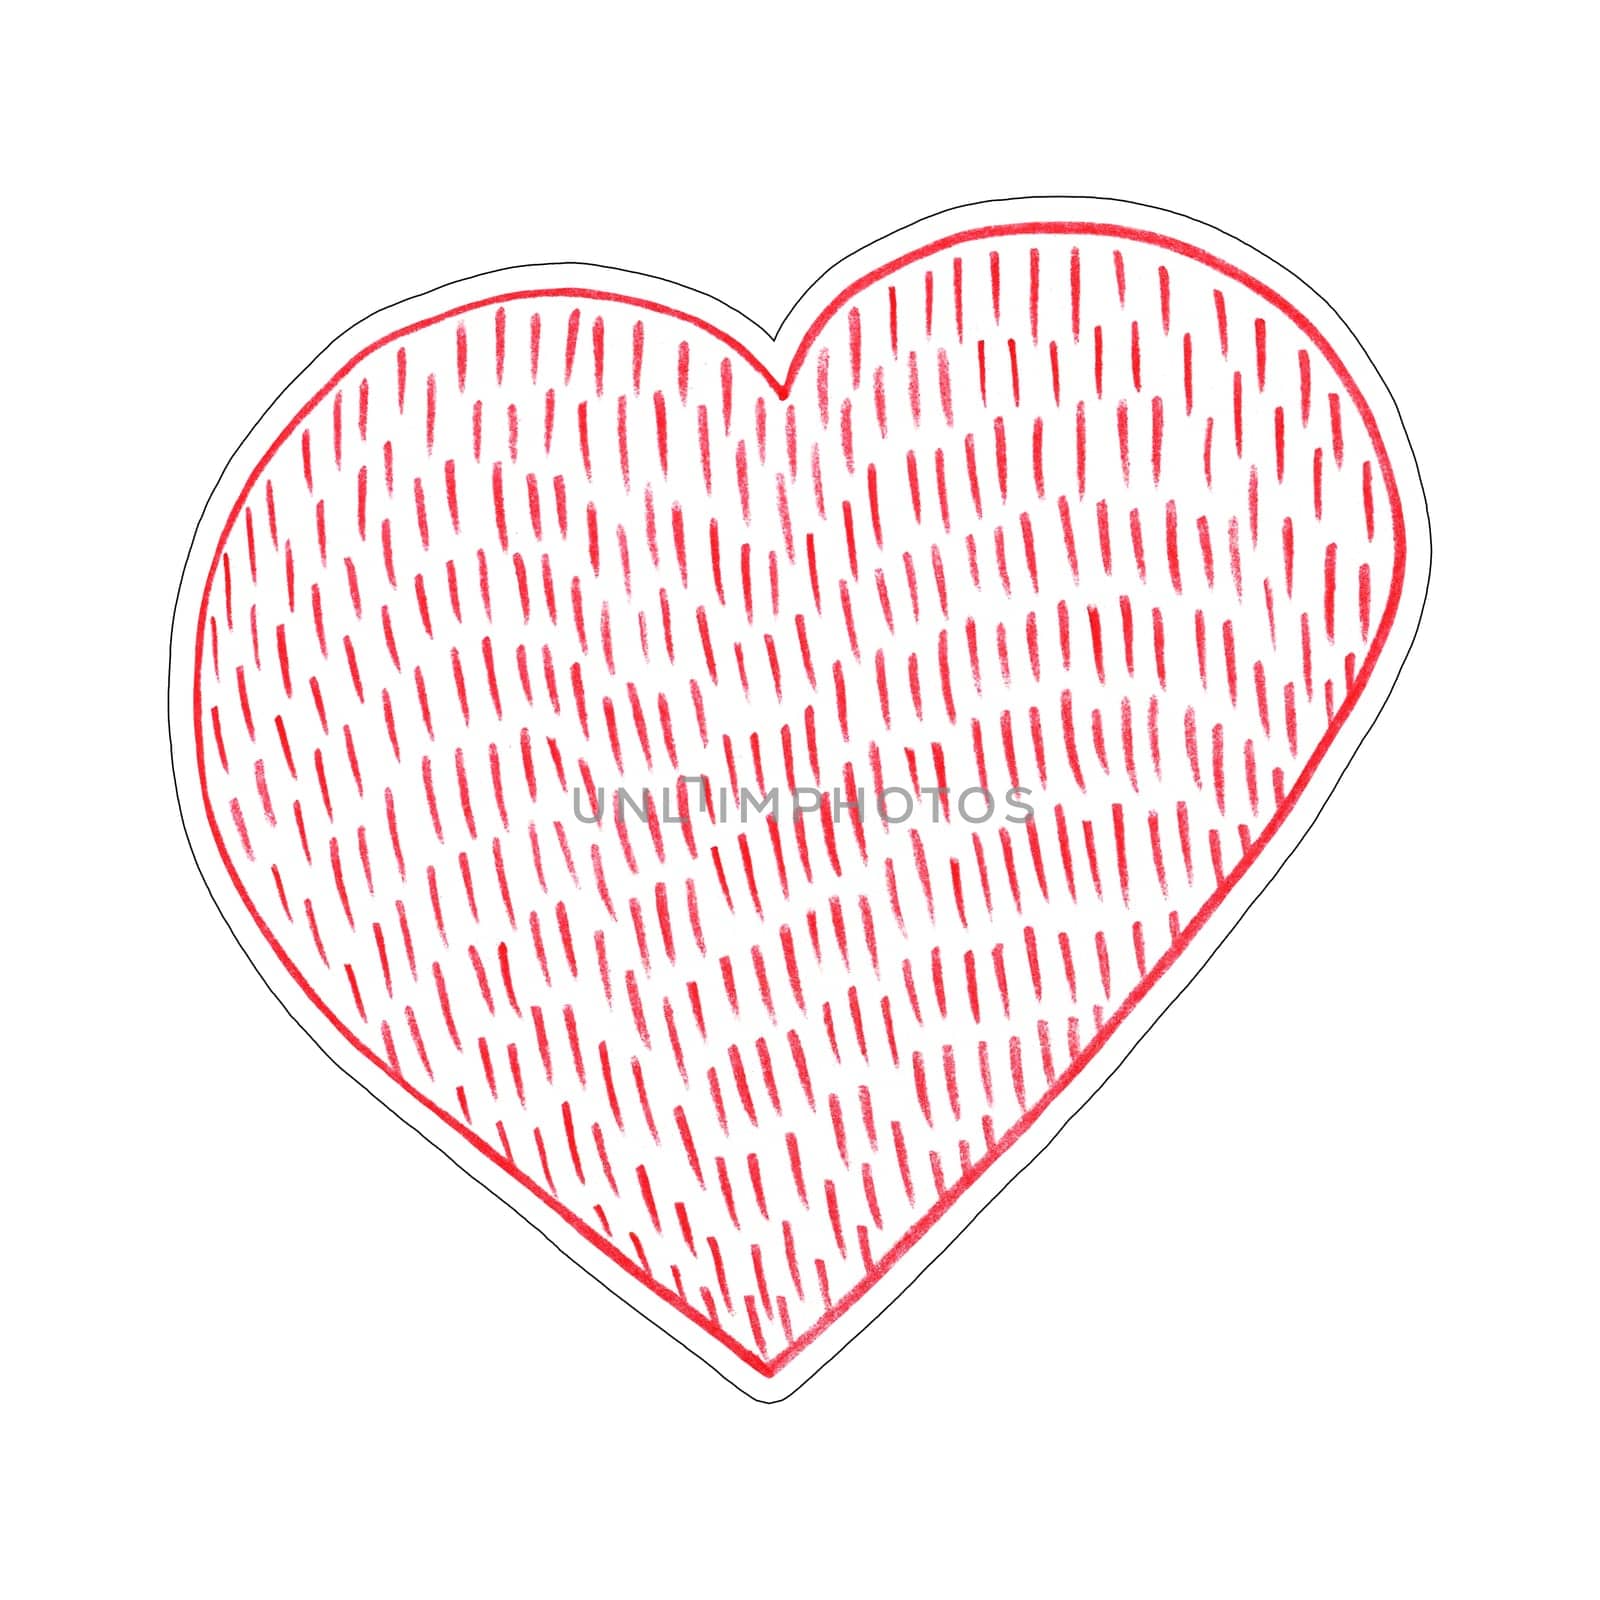 Red Heart Sticker Drawn by Colored Pencil. The Sign of World Heart Day. Symbol of Valentines Day. Heart Shape Isolated on White Background.